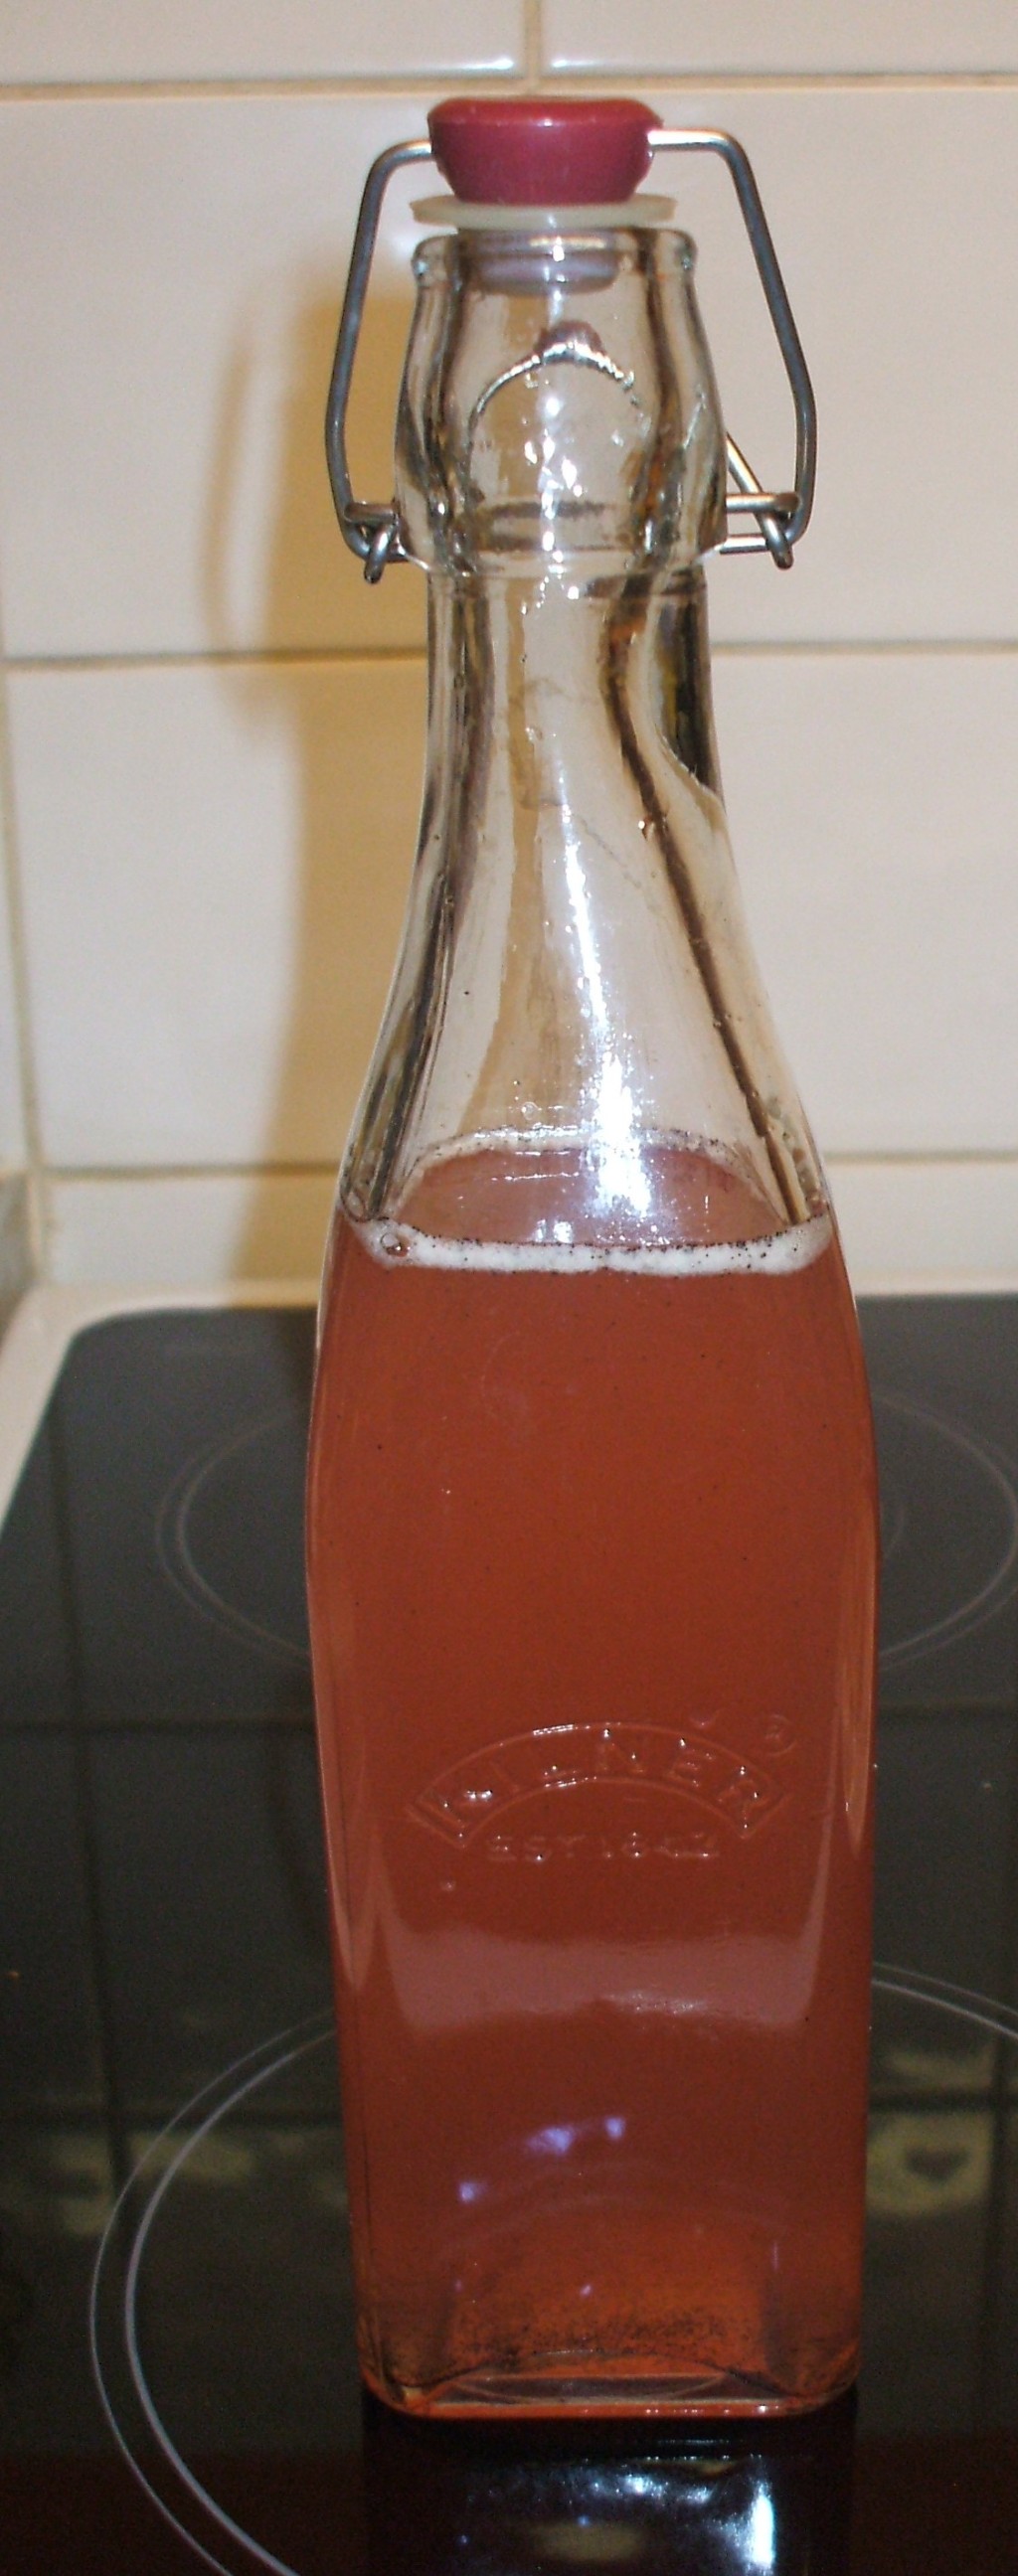 You have to try this – Rhubarb Cordial